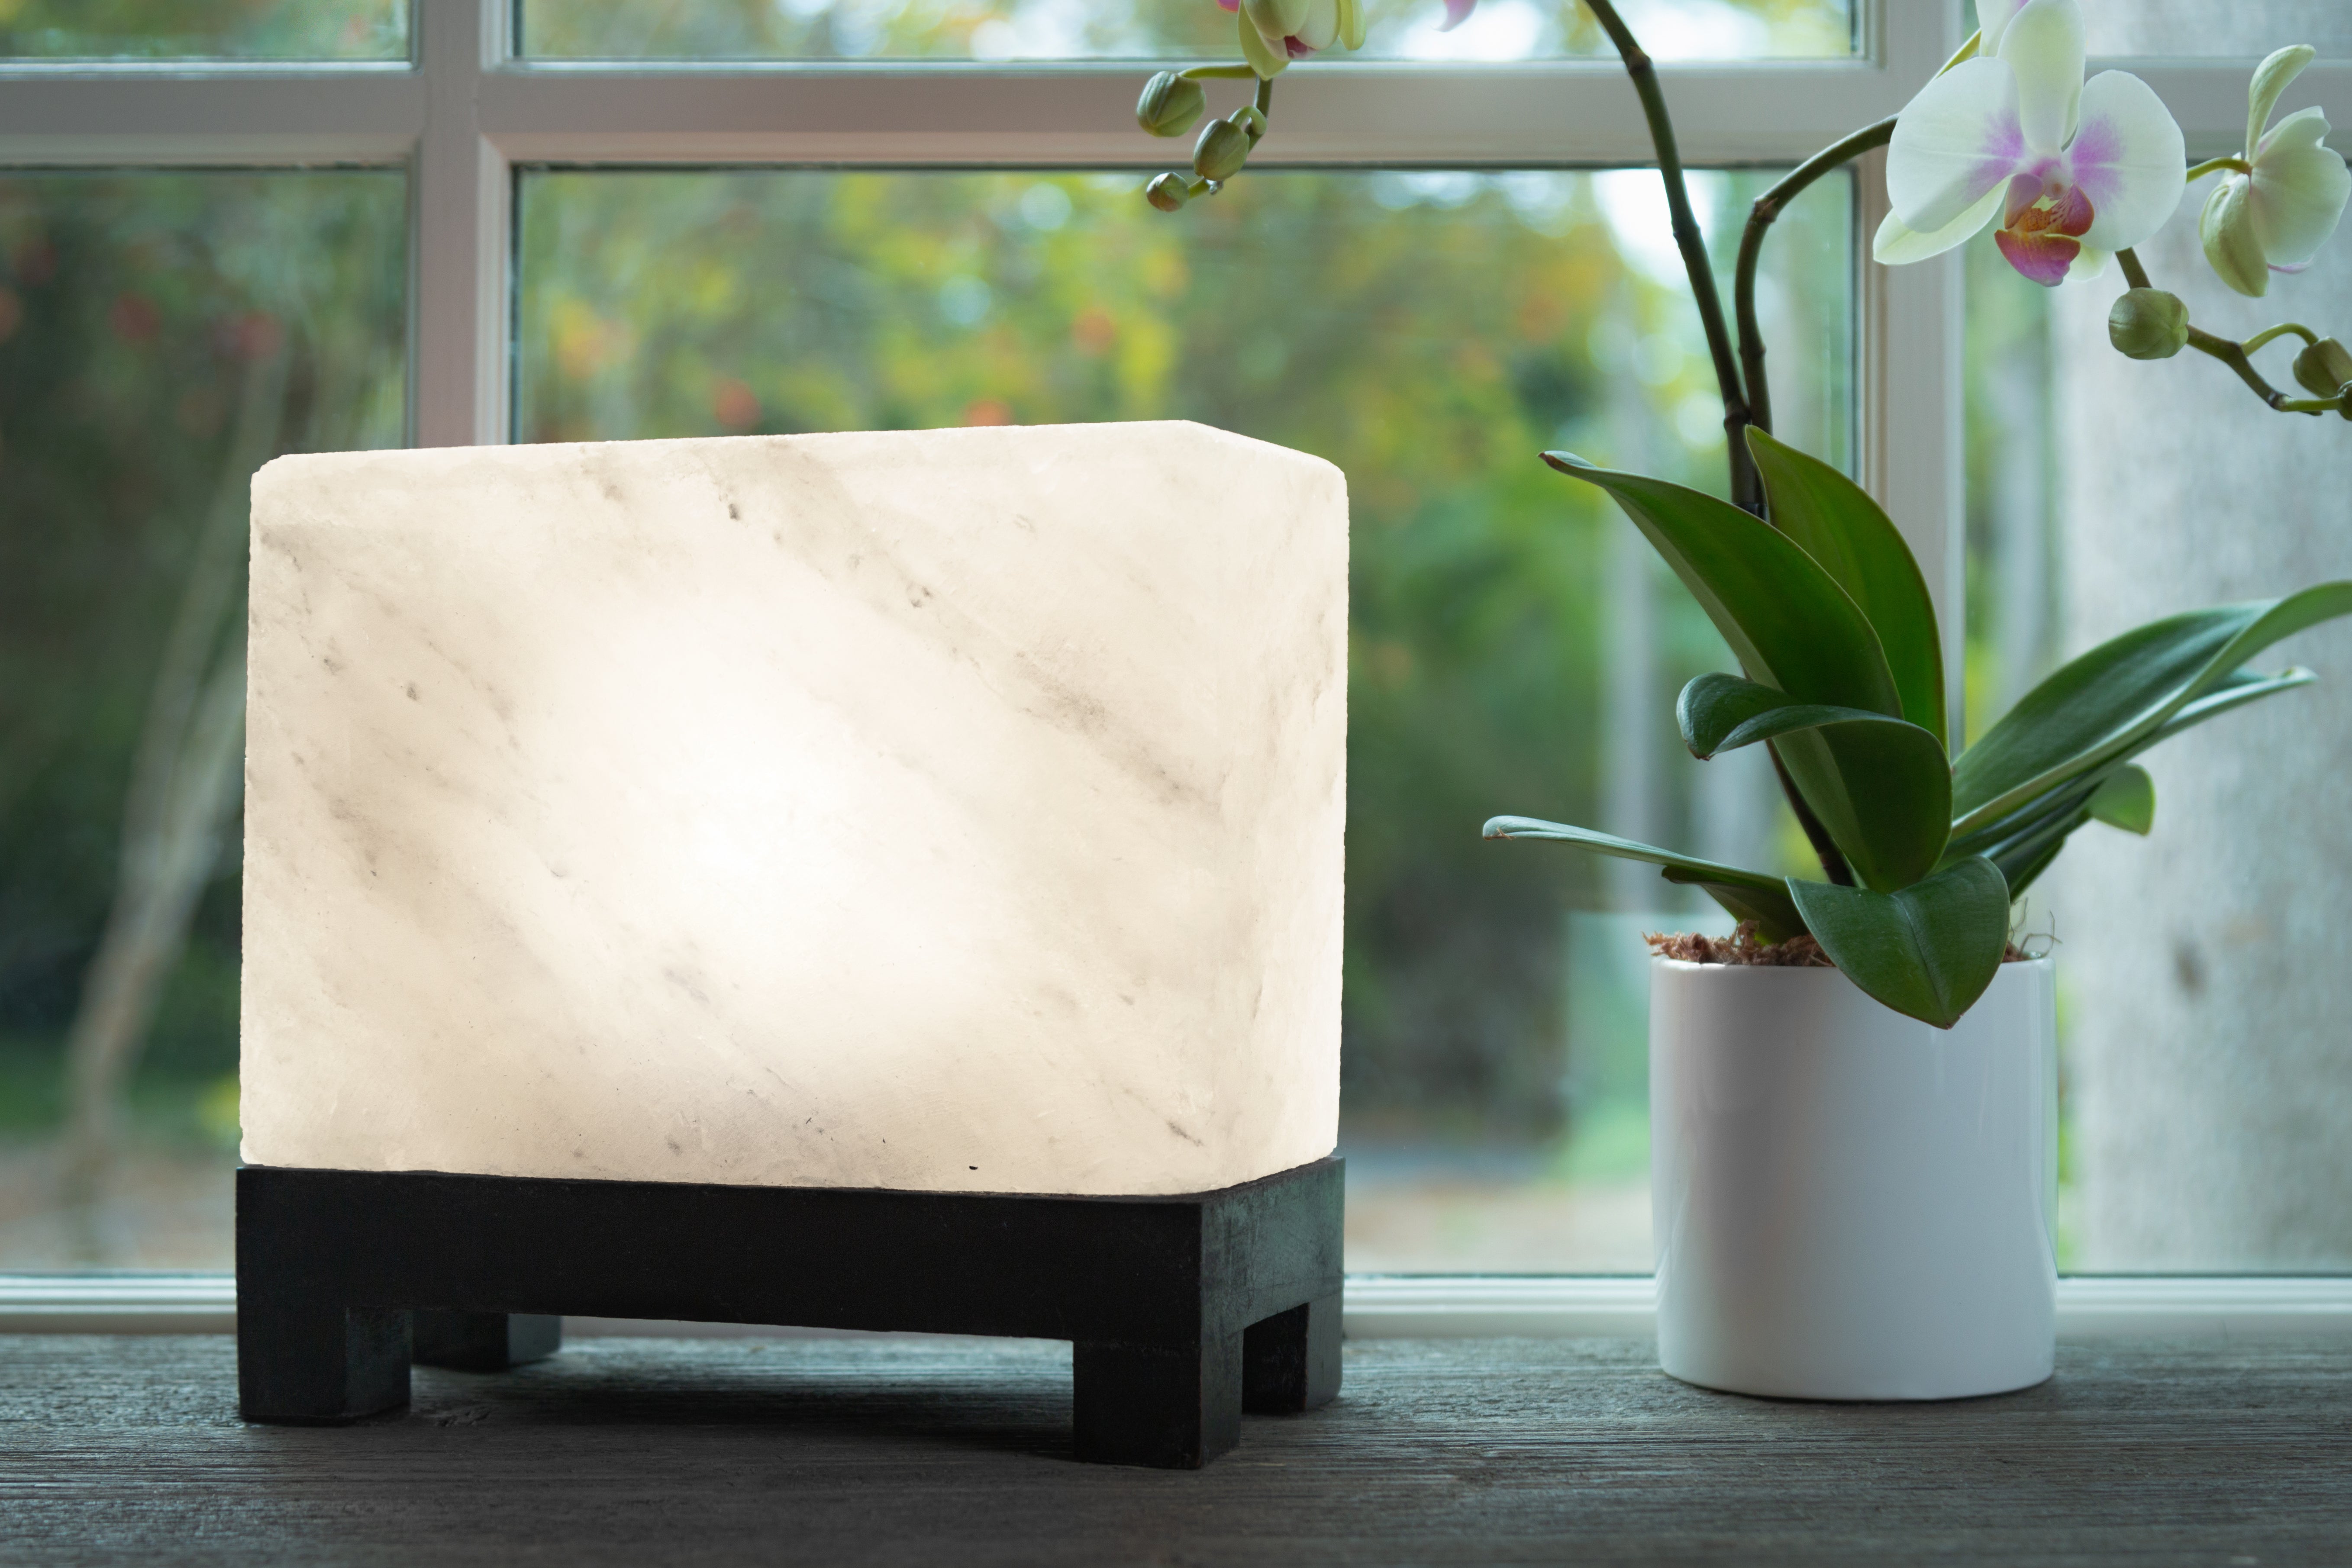 100% Authentic Natural Himalayan Salt Lamp; Hand-Carved Modern Rectangle in Rare White Crystal Rock Salt from The Himalayan Mountains; Footed Wood Base, UL-Listed Dimmer Cord + Extra Bulb; 11.5 lbs